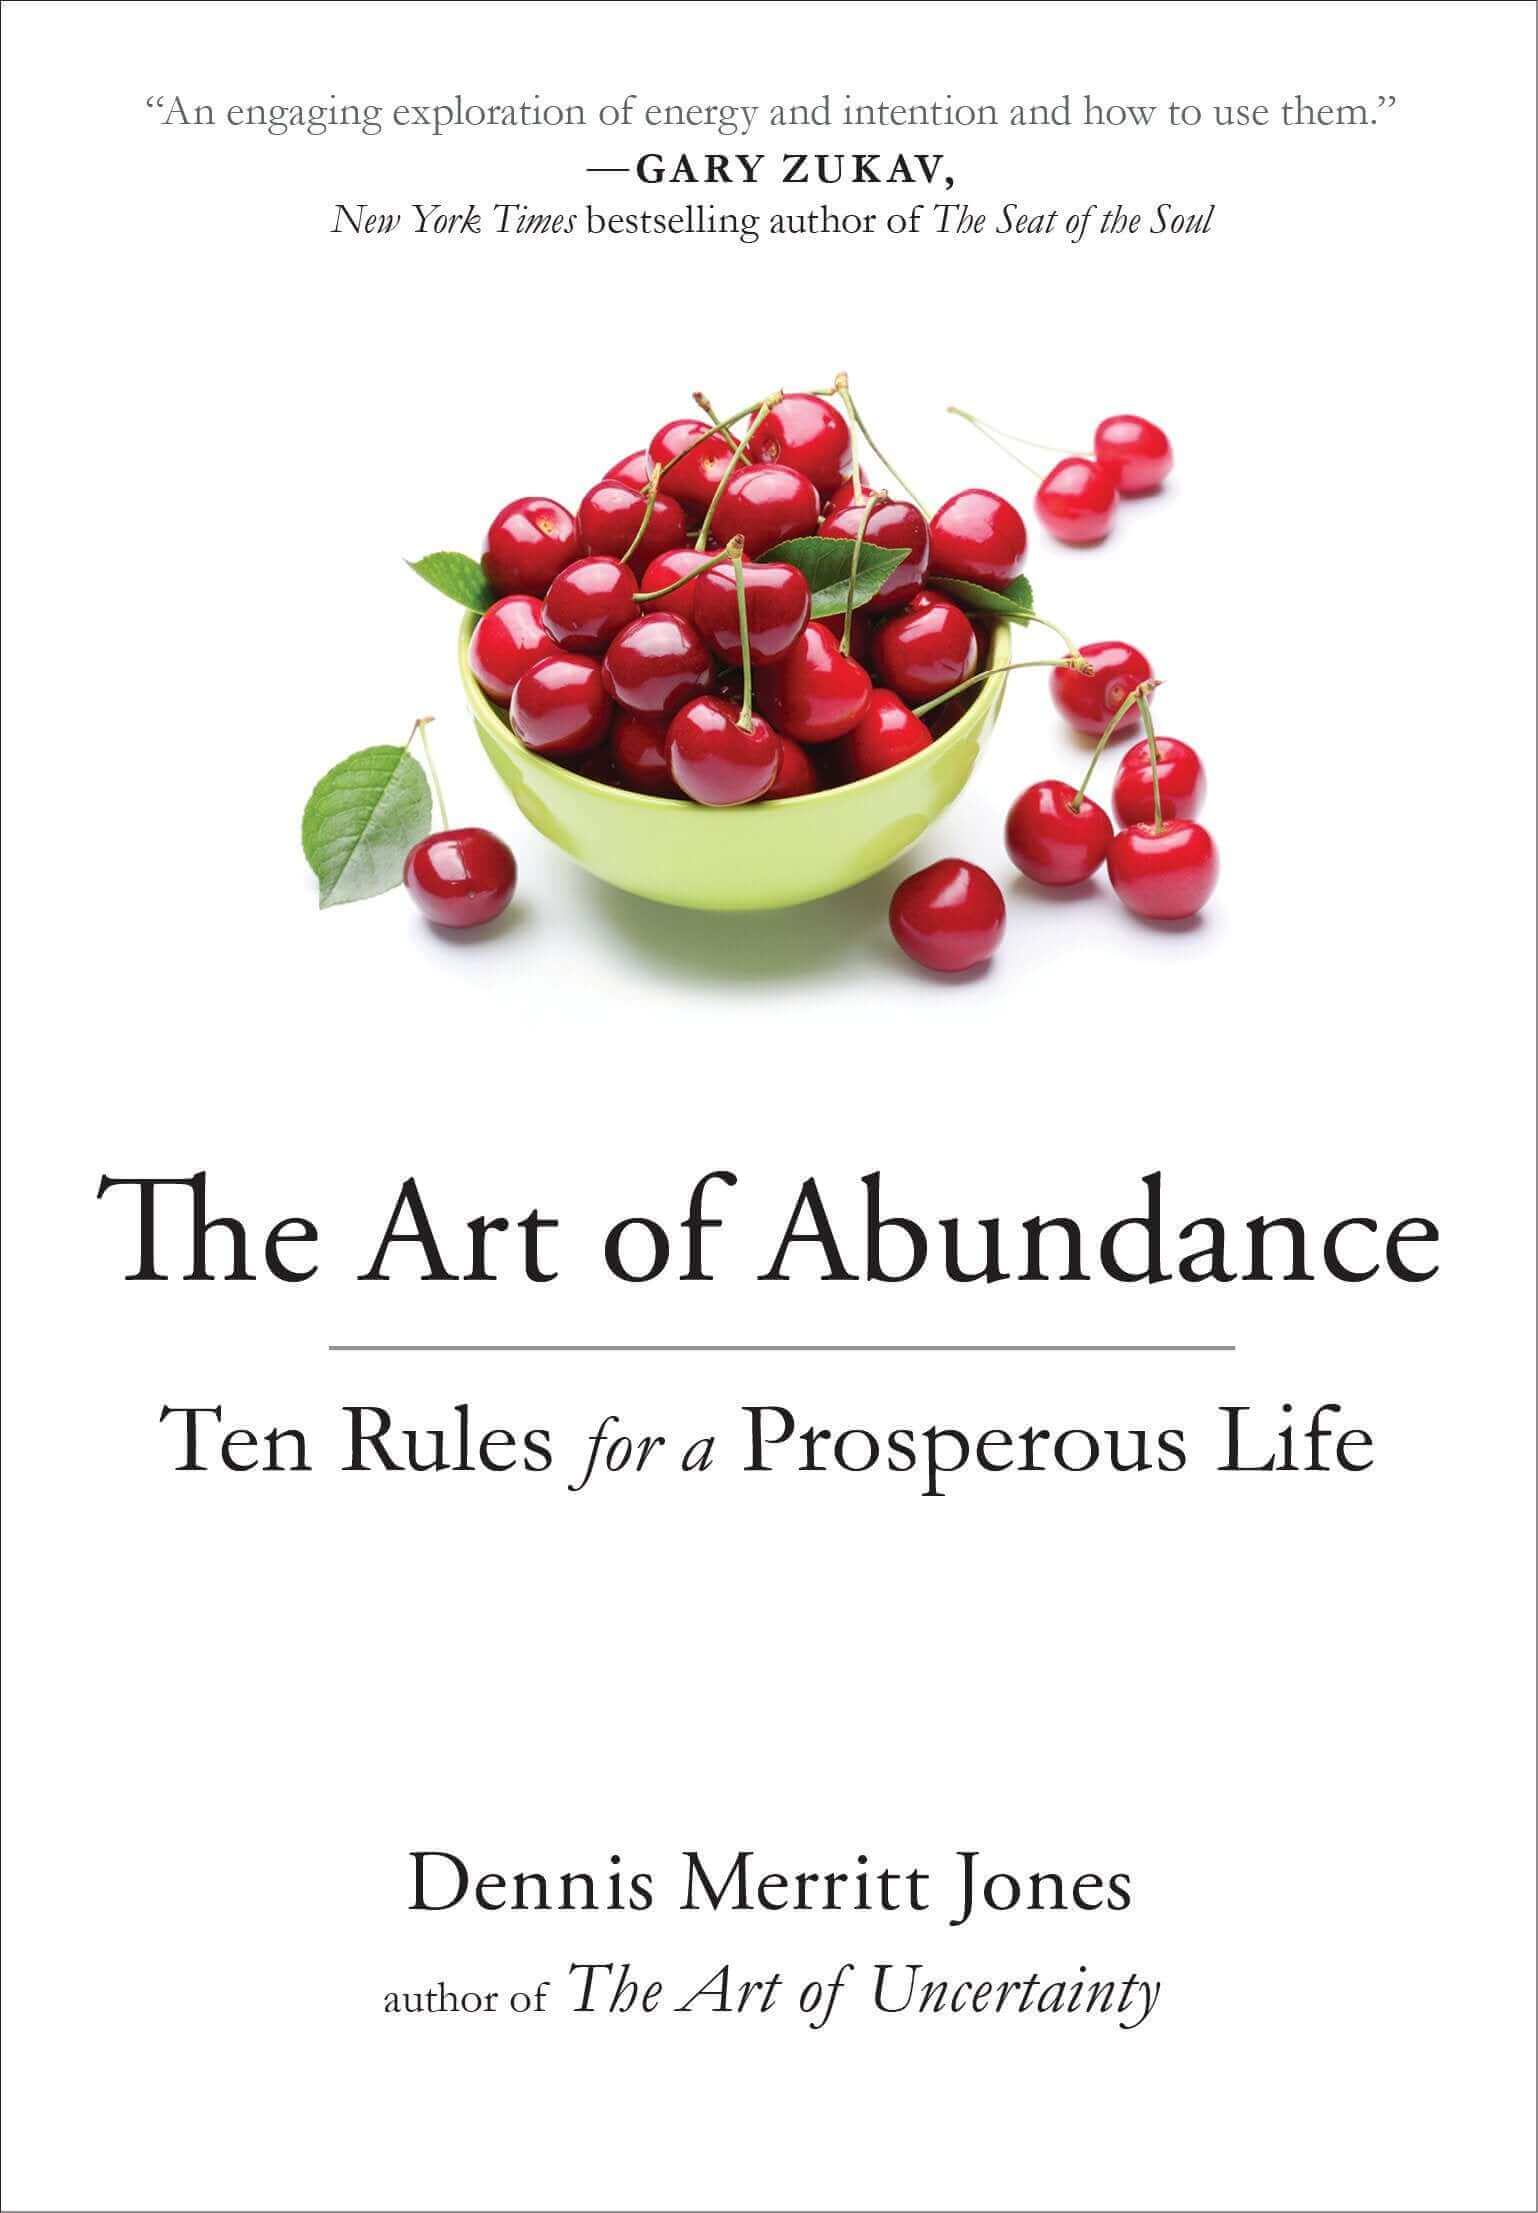 THE ART OF ABUNDANCE: TEN RULES FOR A PROSPEROUS LIFE at $16 only from Spiral Rain